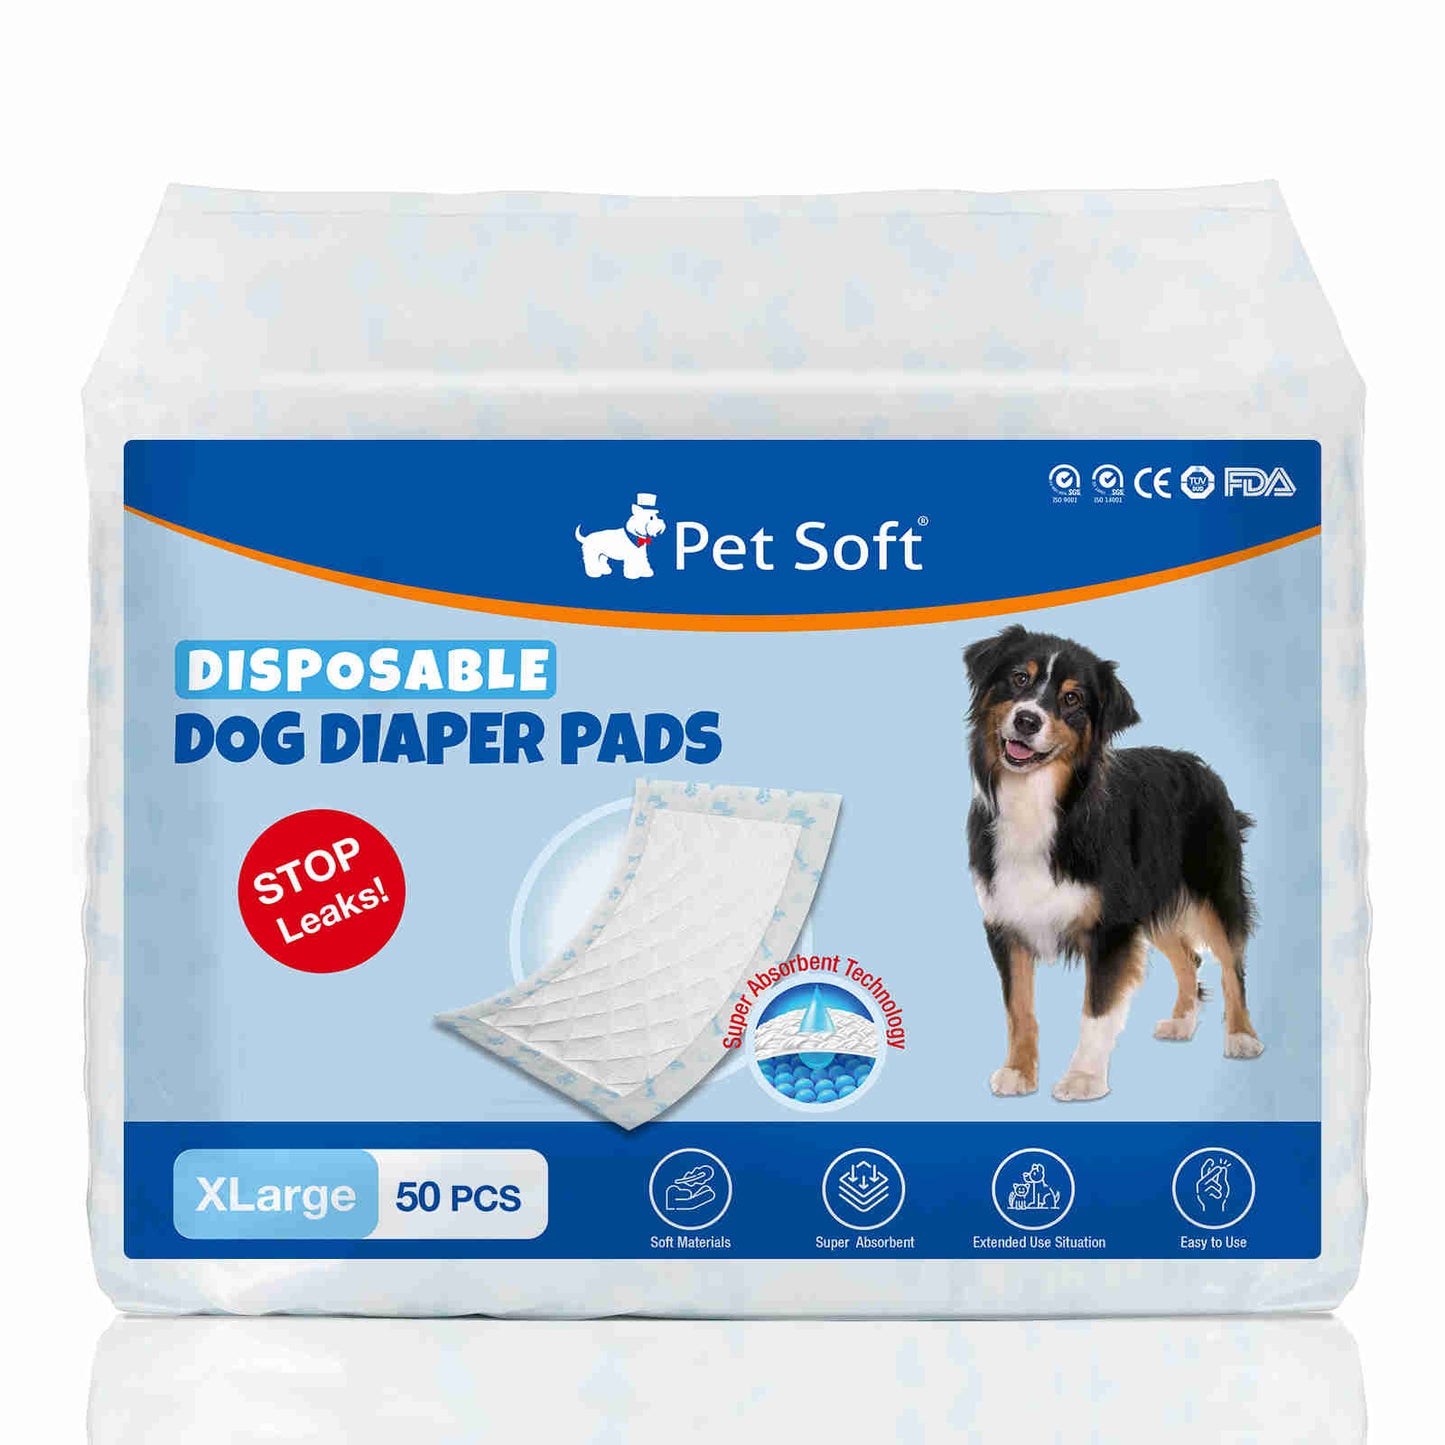 Disposable Dog Diaper Liners, Fit Most Dog Wraps and Belly Bands, Blue, 1 Pack